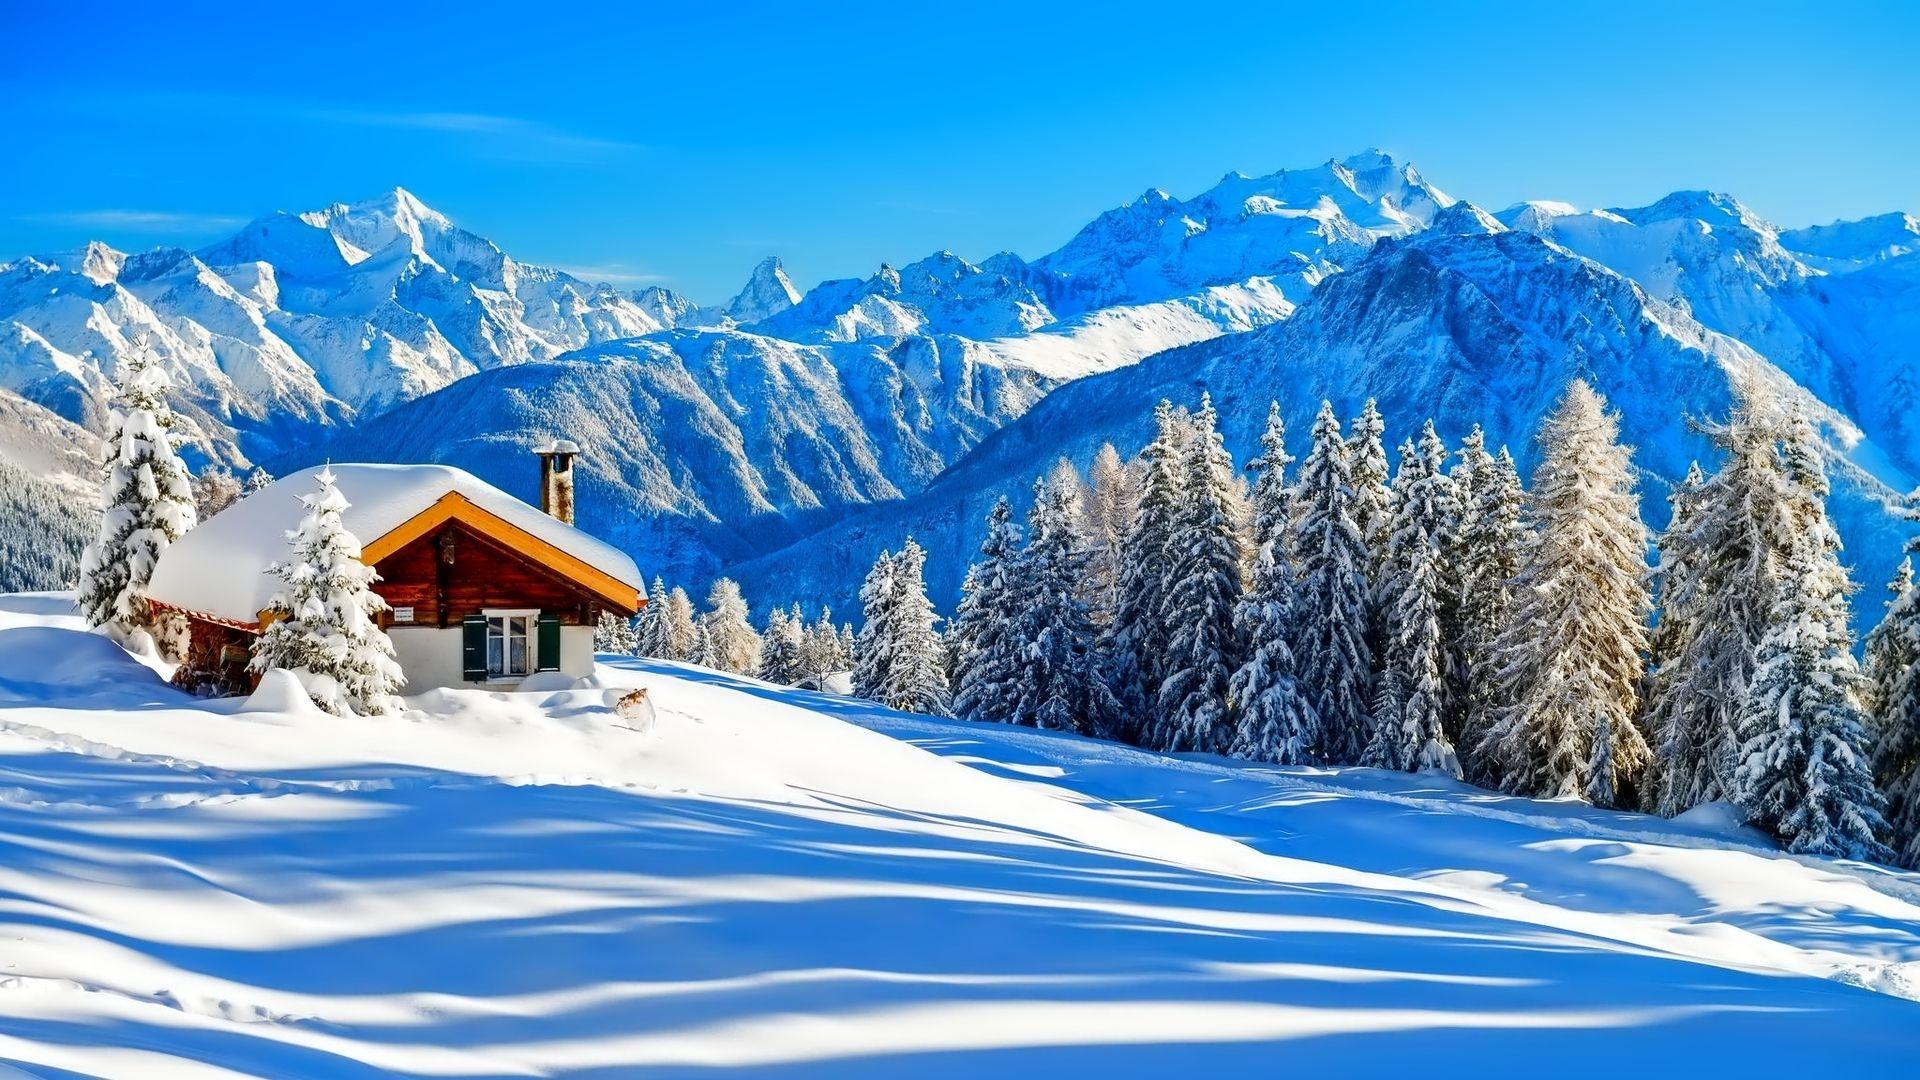 winter mountain cabin backgrounds